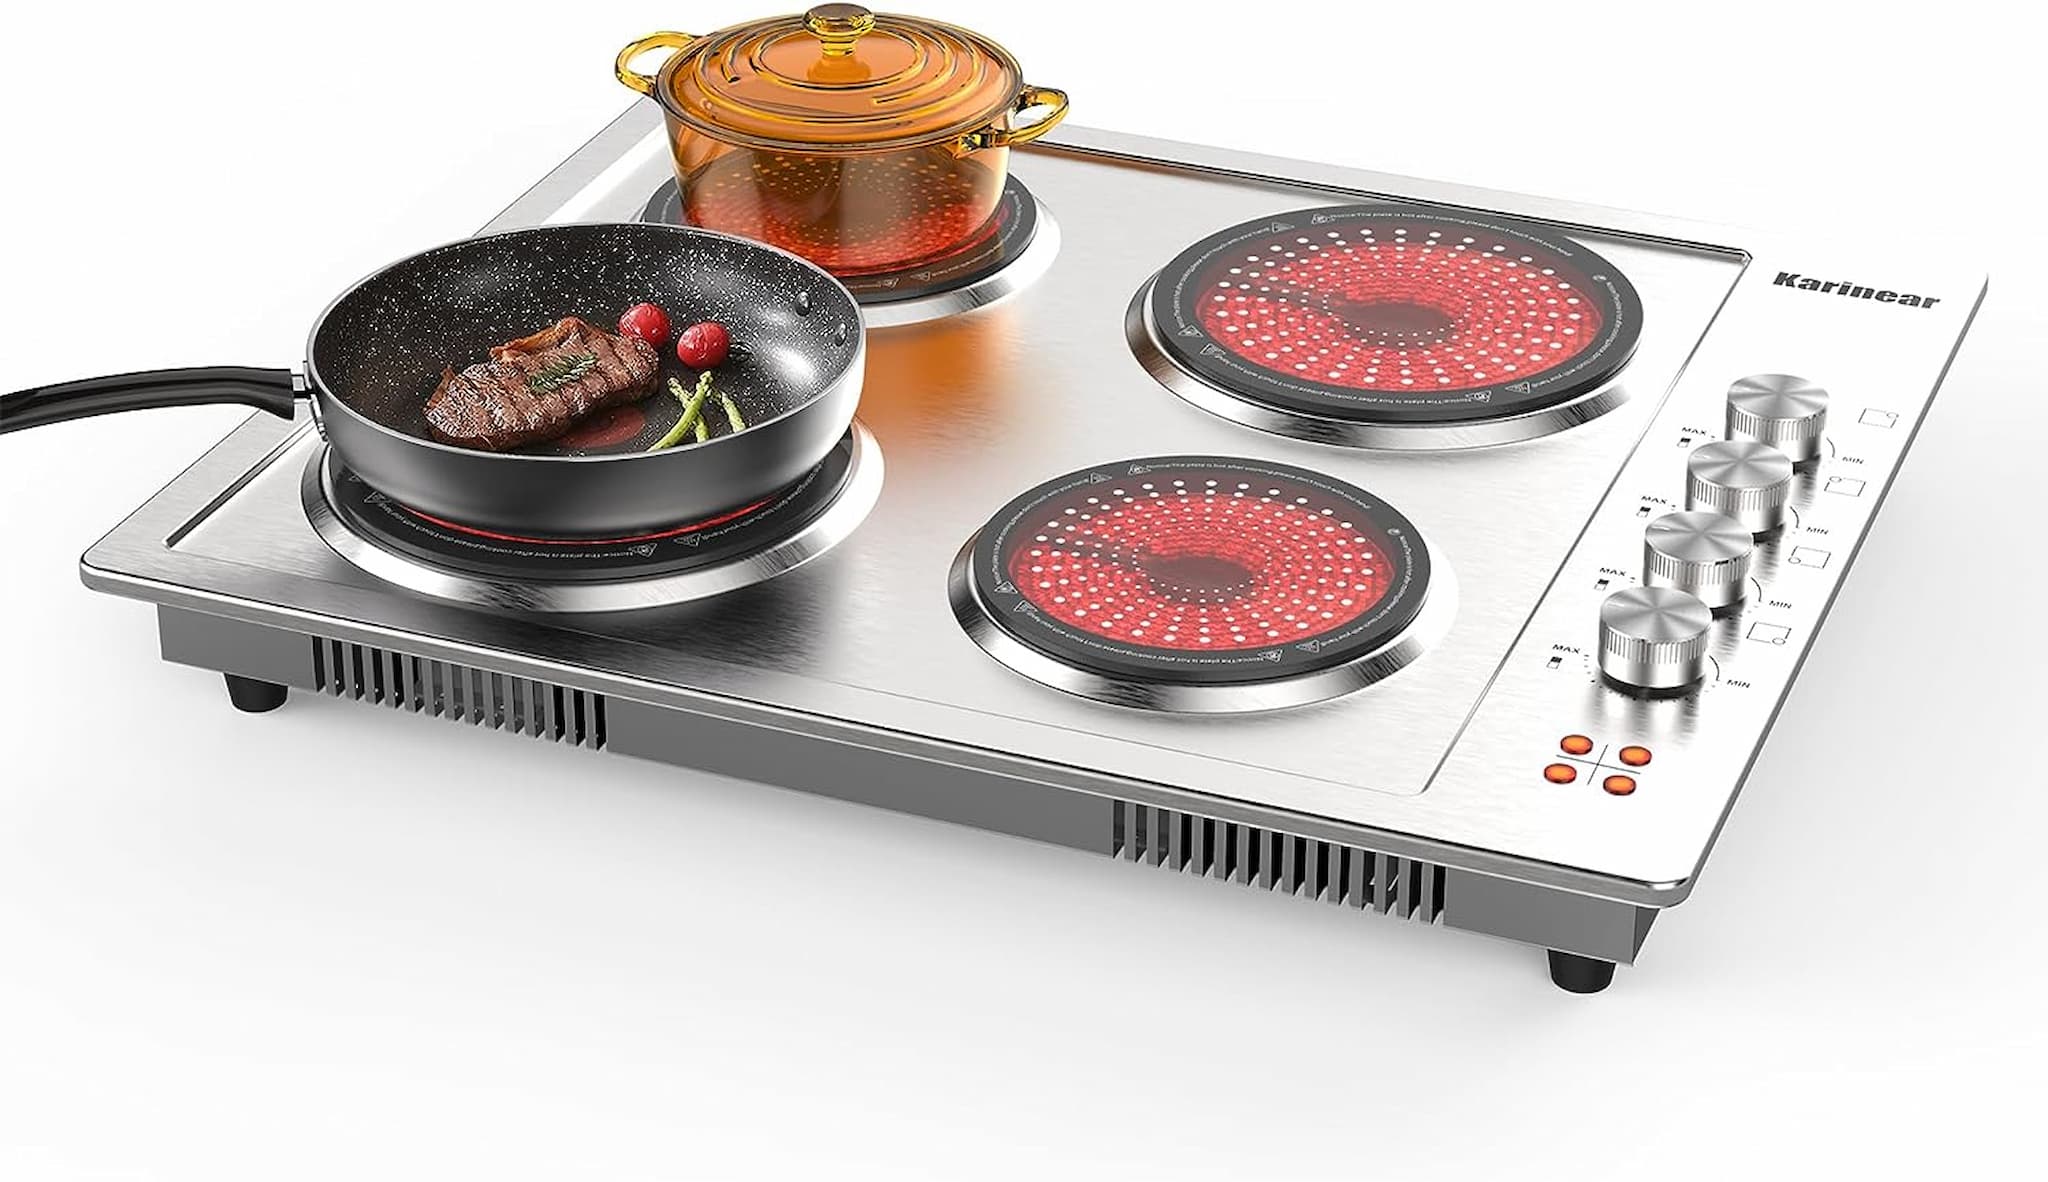 Karinear 24 inch Electric Stainless Steel Cooktop